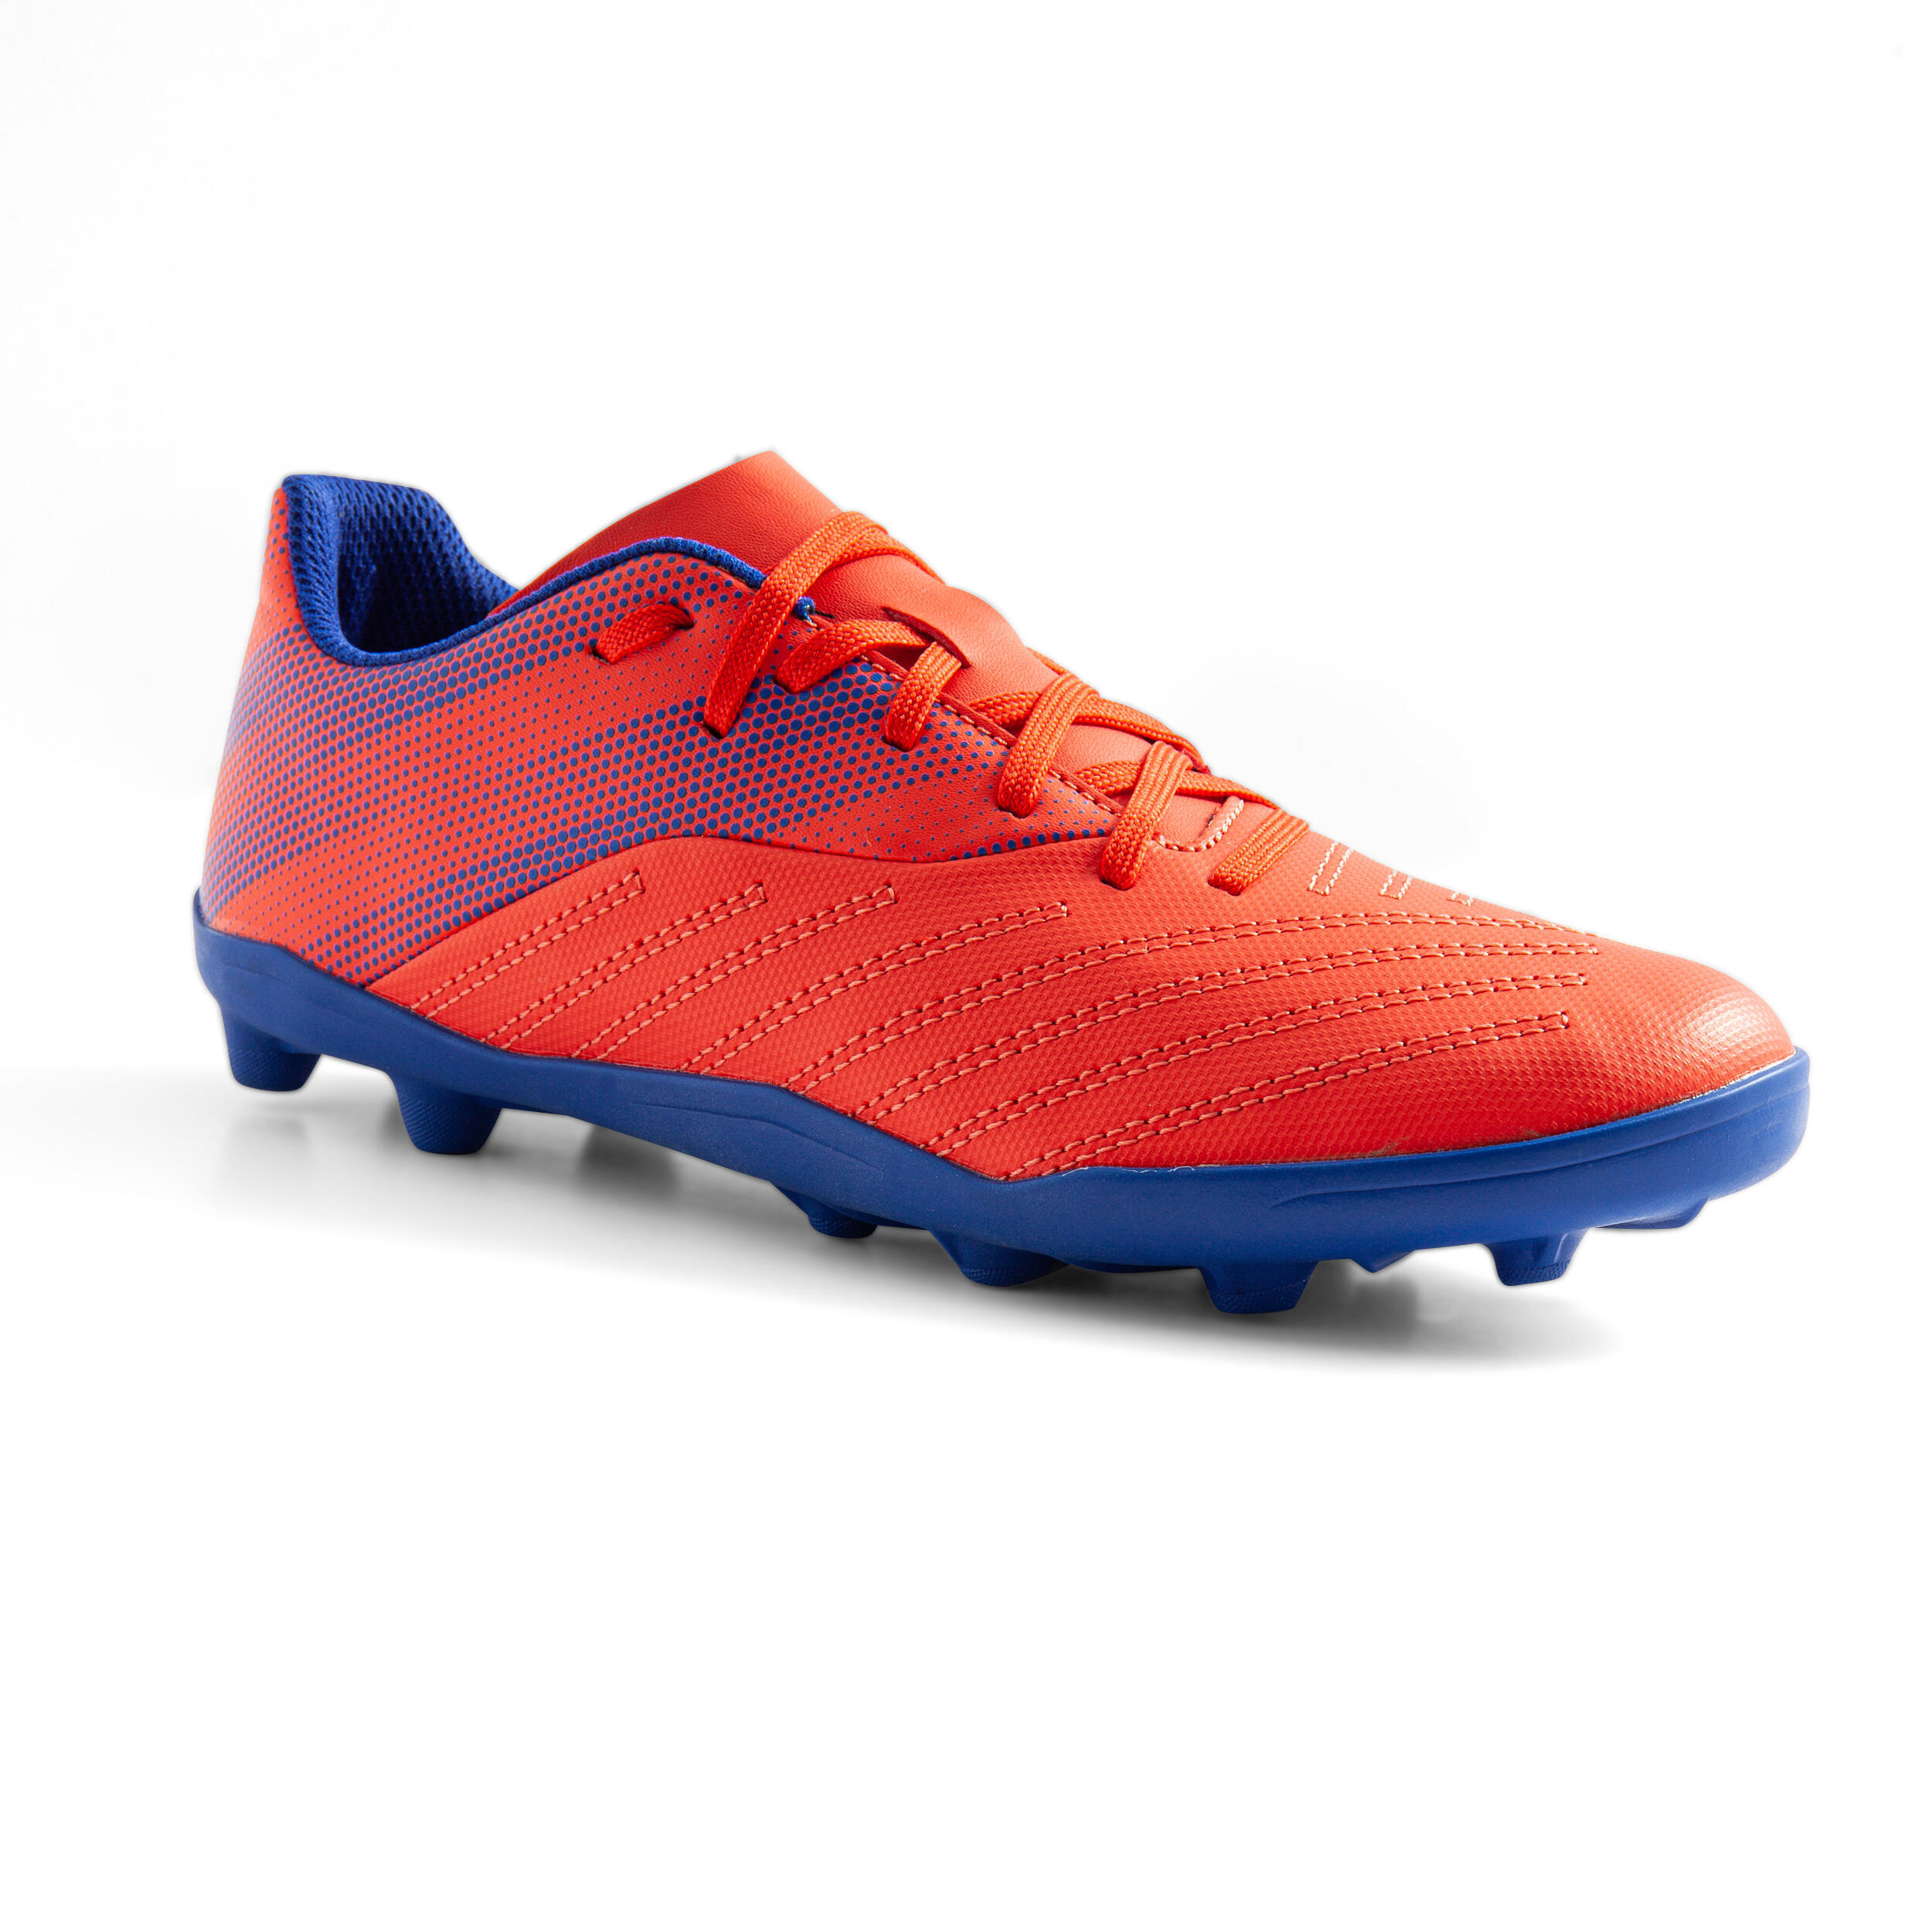 KIPSTA Kids' Dry Pitch Lace-Up Football Boots Agility 140 FG - Red/Blue